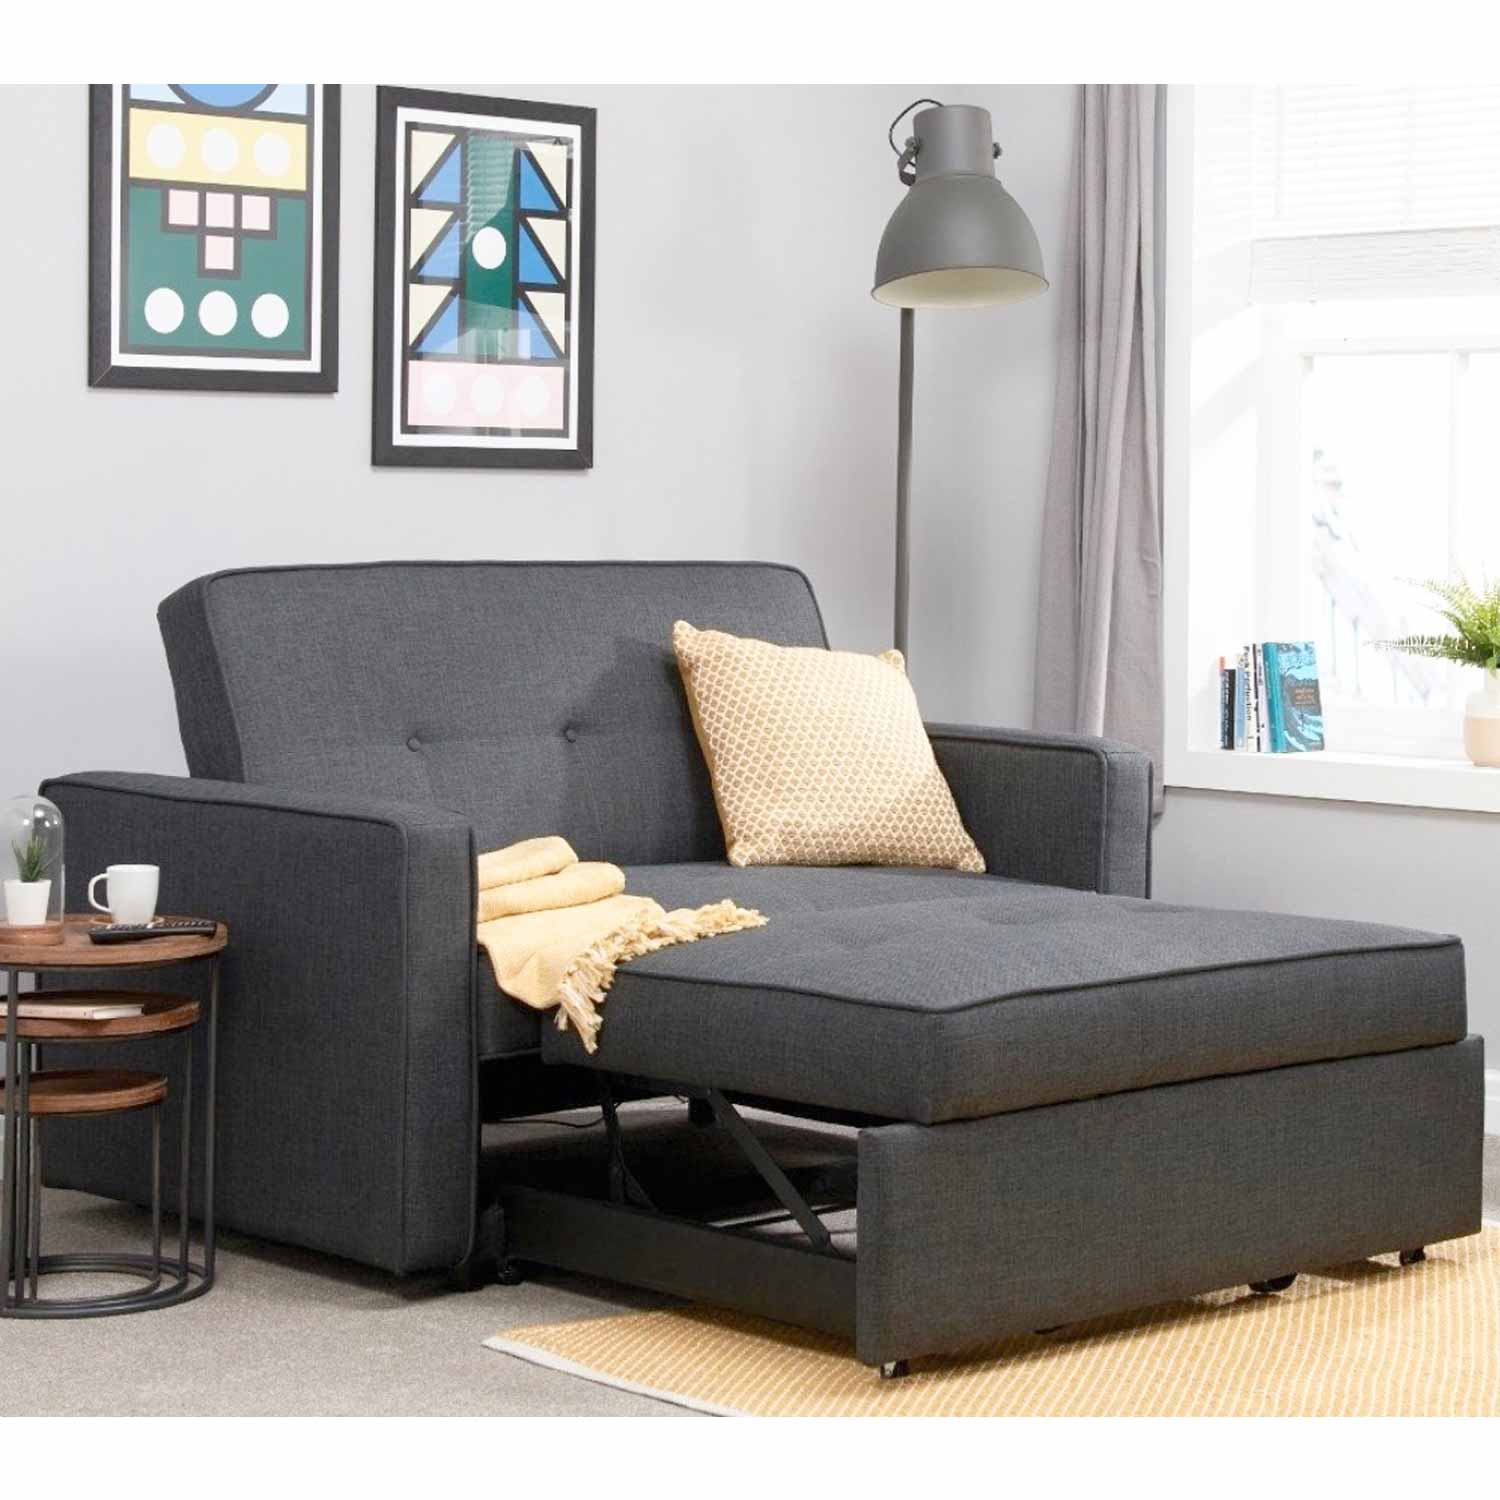 Brinkoff Pull Out Sofabed Dark Gray